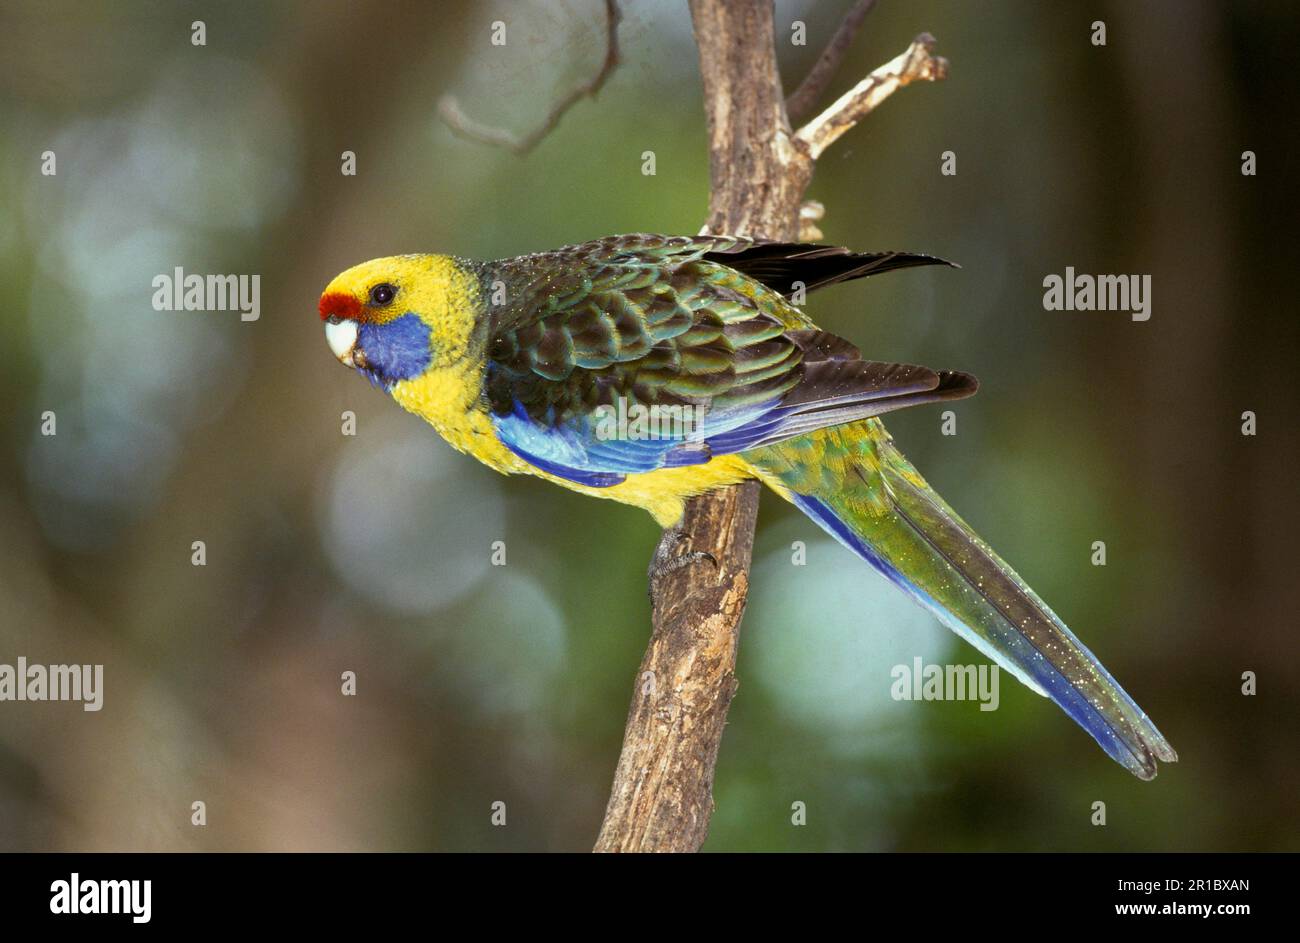 Green rosella (Platycercus caledonicus), Yellow-bellied Parakeets, endemic, Parrots, Flat-tailed Parakeets, Parakeets, Animals, Birds, Green Rosella Stock Photo